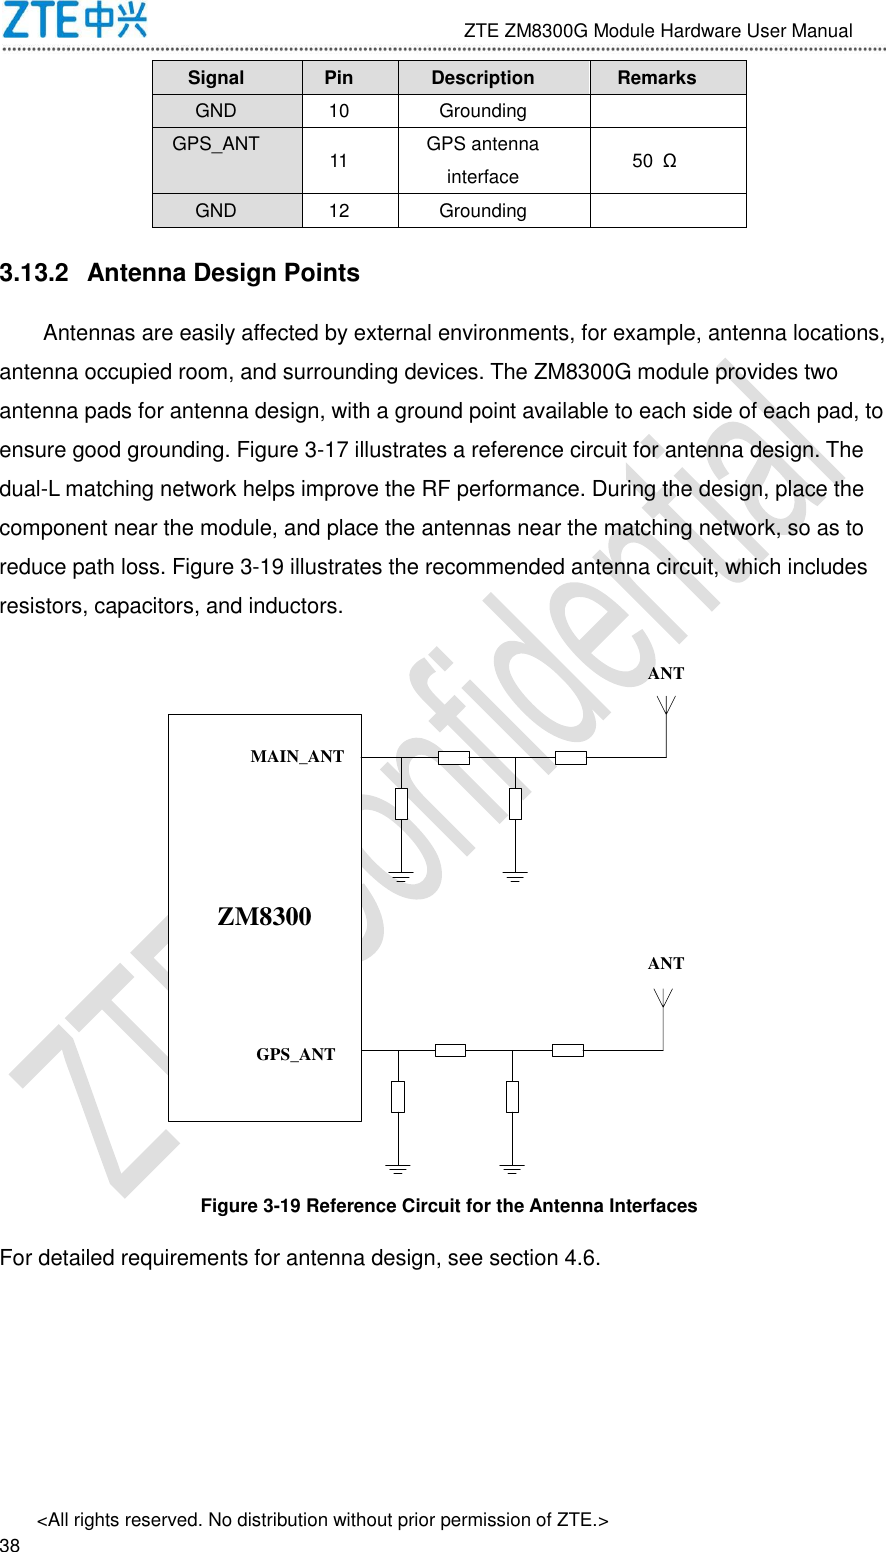                              ZTE ZM8300G Module Hardware User Manual &lt;All rights reserved. No distribution without prior permission of ZTE.&gt;                                                               38 Signal Pin Description Remarks GND 10 Grounding  GPS_ANT 11 GPS antenna interface 50  Ω GND 12 Grounding  3.13.2  Antenna Design Points Antennas are easily affected by external environments, for example, antenna locations, antenna occupied room, and surrounding devices. The ZM8300G module provides two antenna pads for antenna design, with a ground point available to each side of each pad, to ensure good grounding. Figure 3-17 illustrates a reference circuit for antenna design. The dual-L matching network helps improve the RF performance. During the design, place the component near the module, and place the antennas near the matching network, so as to reduce path loss. Figure 3-19 illustrates the recommended antenna circuit, which includes resistors, capacitors, and inductors. ZM8300ANTANTMAIN_ANTGPS_ANT Figure 3-19 Reference Circuit for the Antenna Interfaces For detailed requirements for antenna design, see section 4.6.    